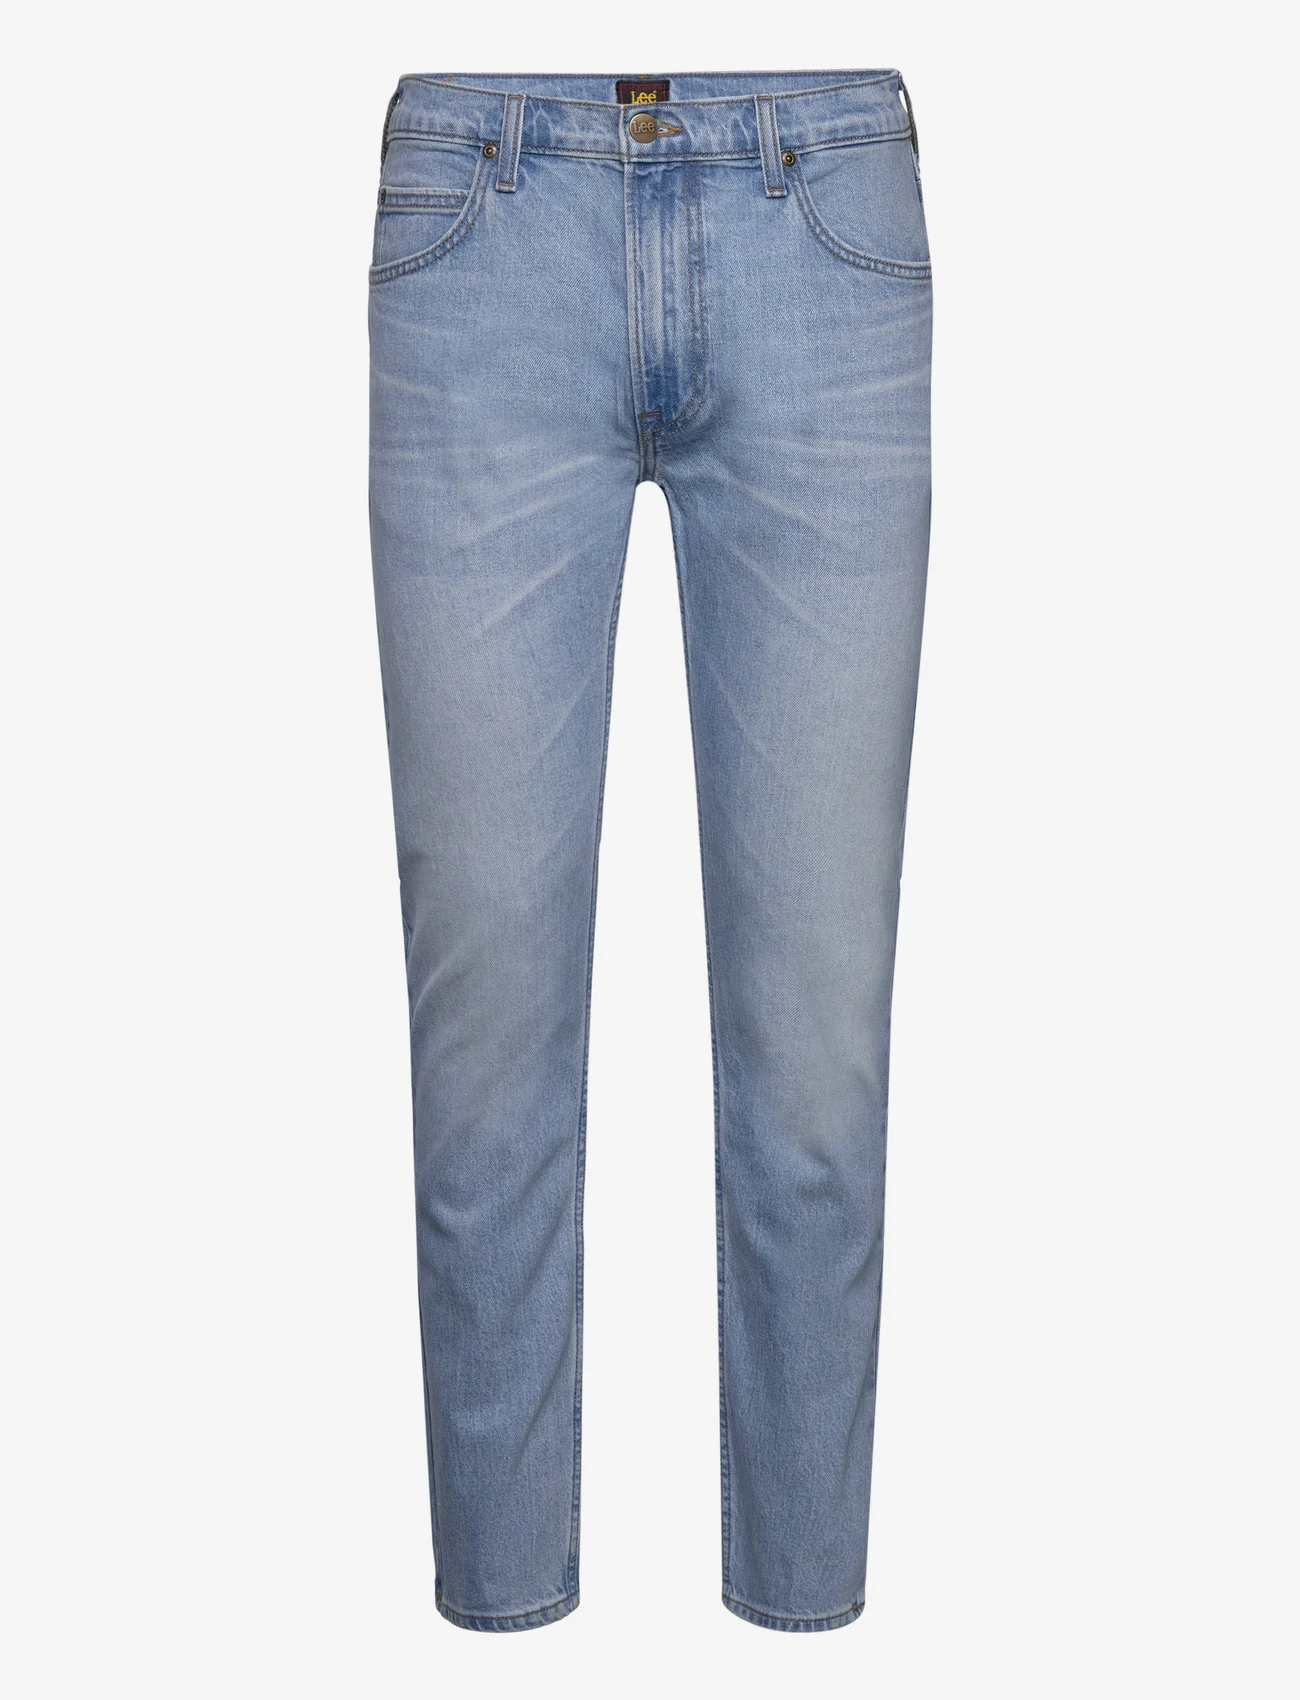 Lee Jeans - RIDER - slim jeans - solid blues - 0